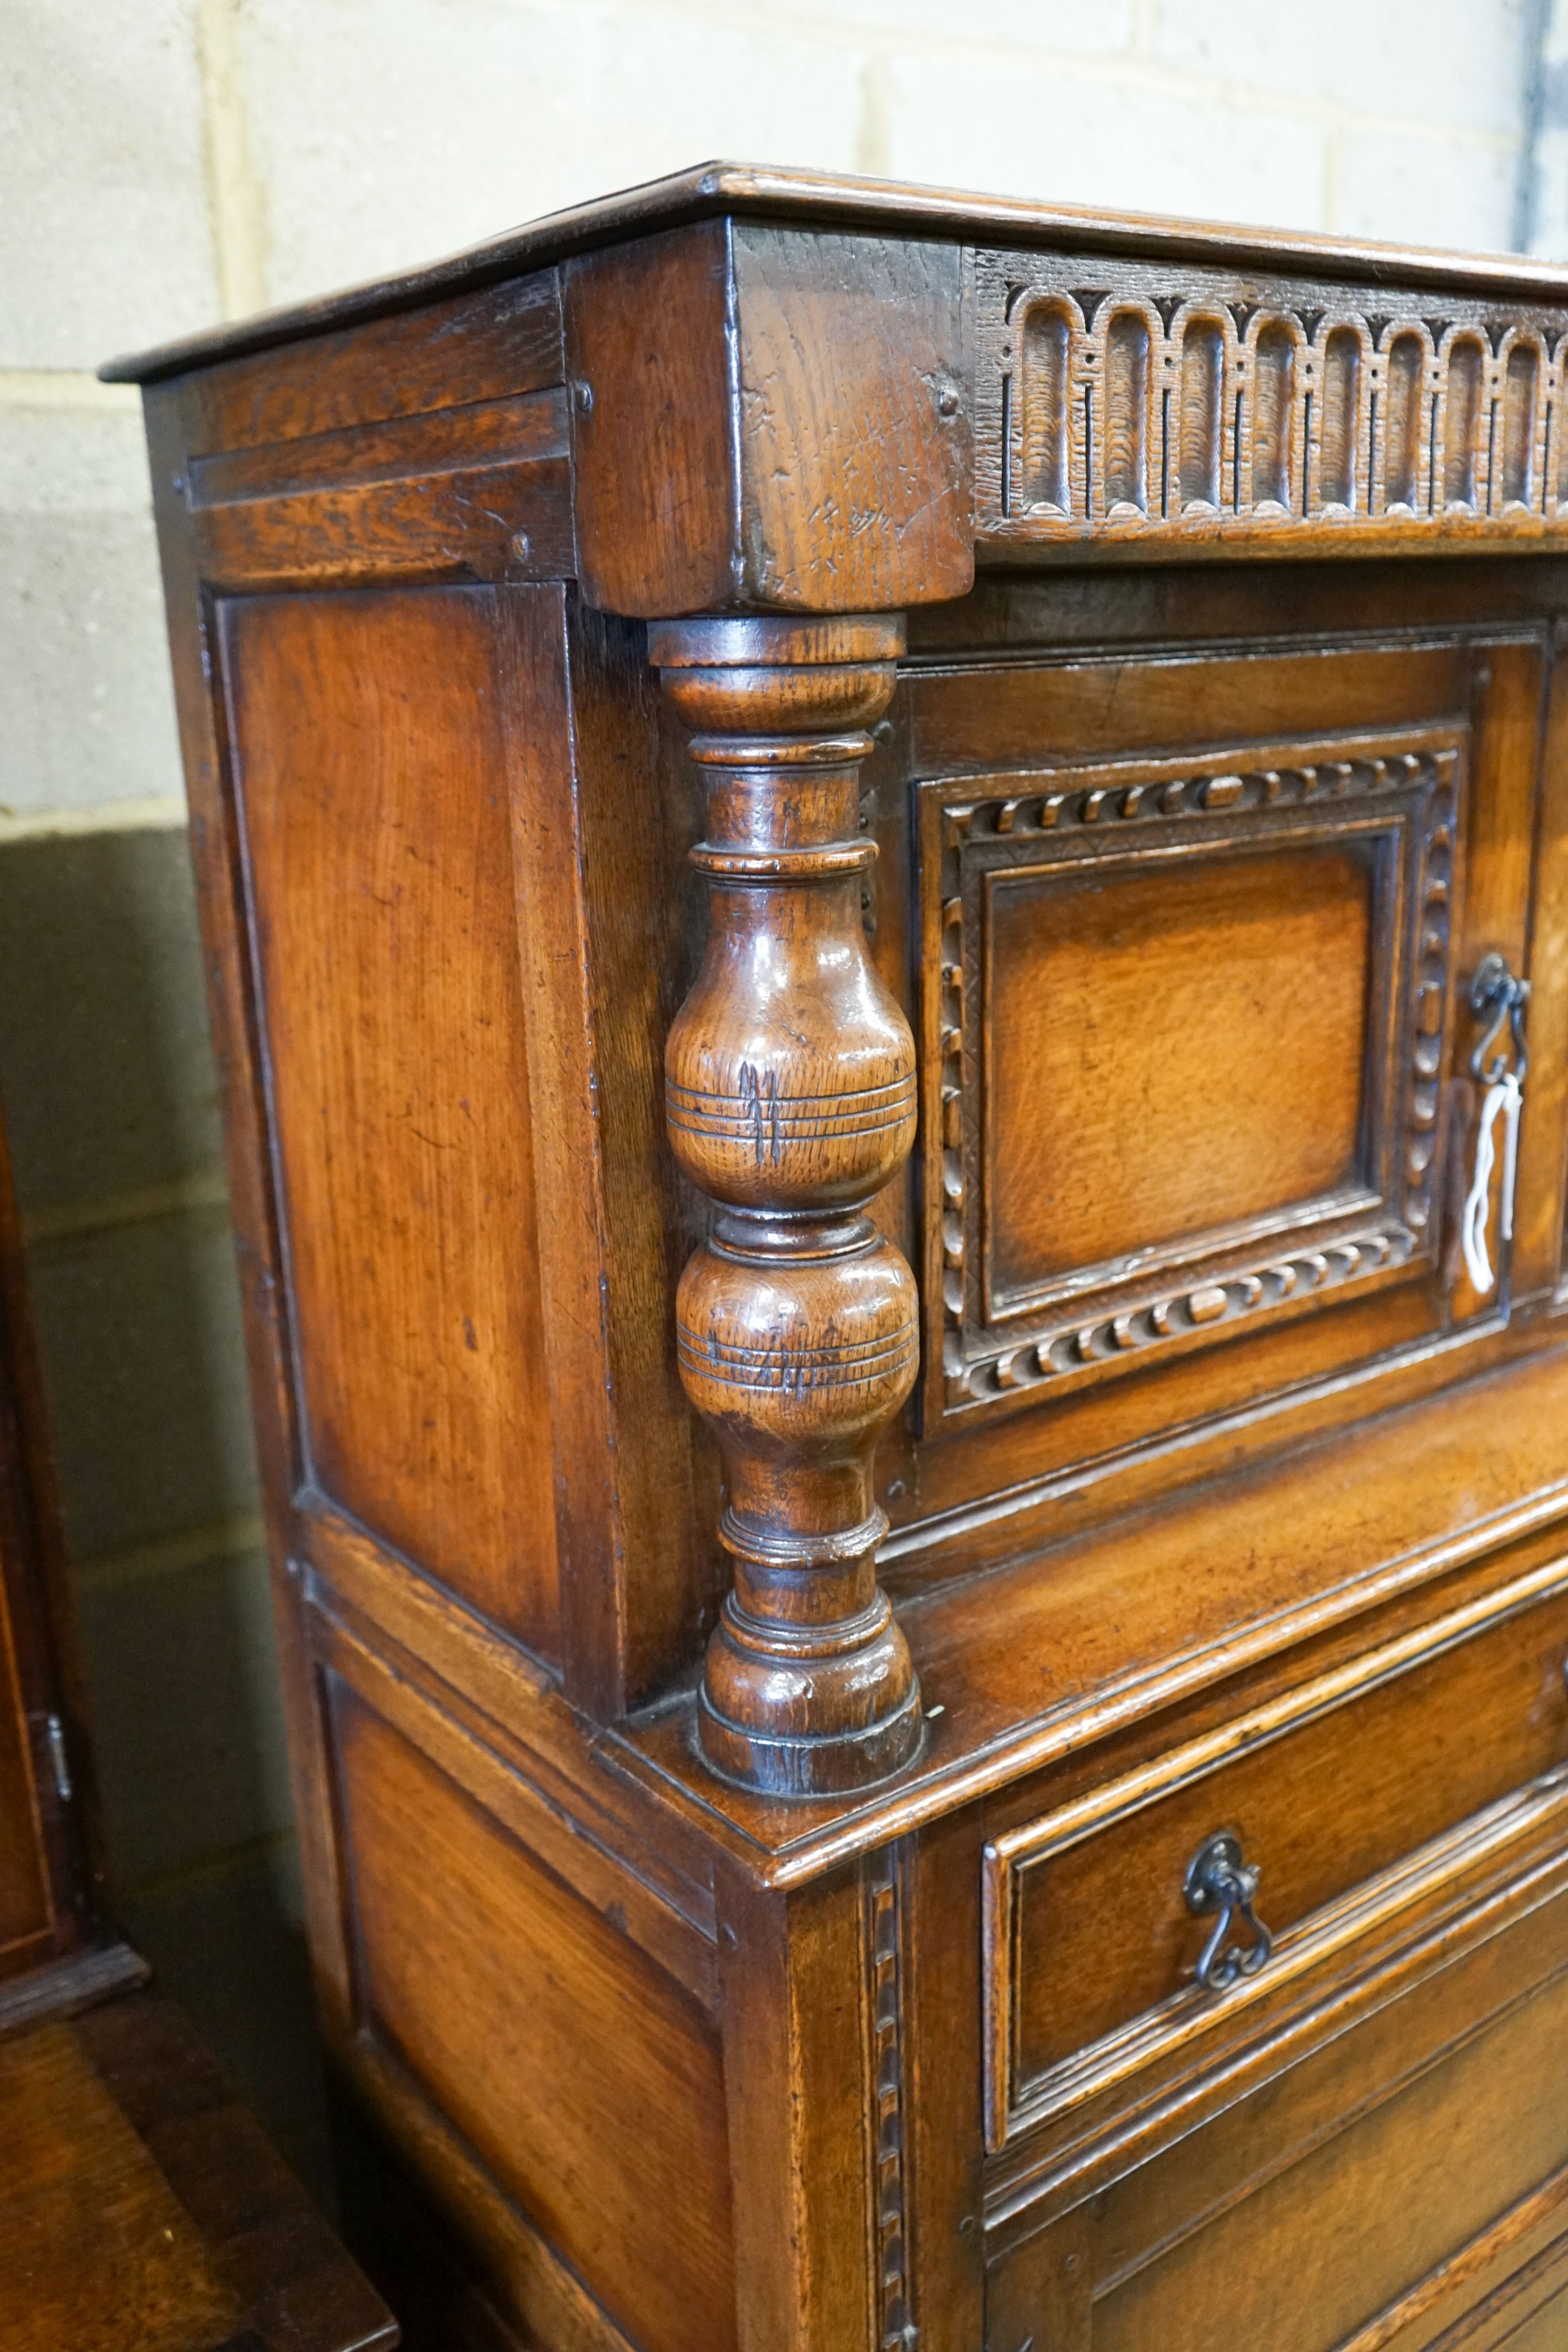 A 17th century style carved and panelled oak court cupboard